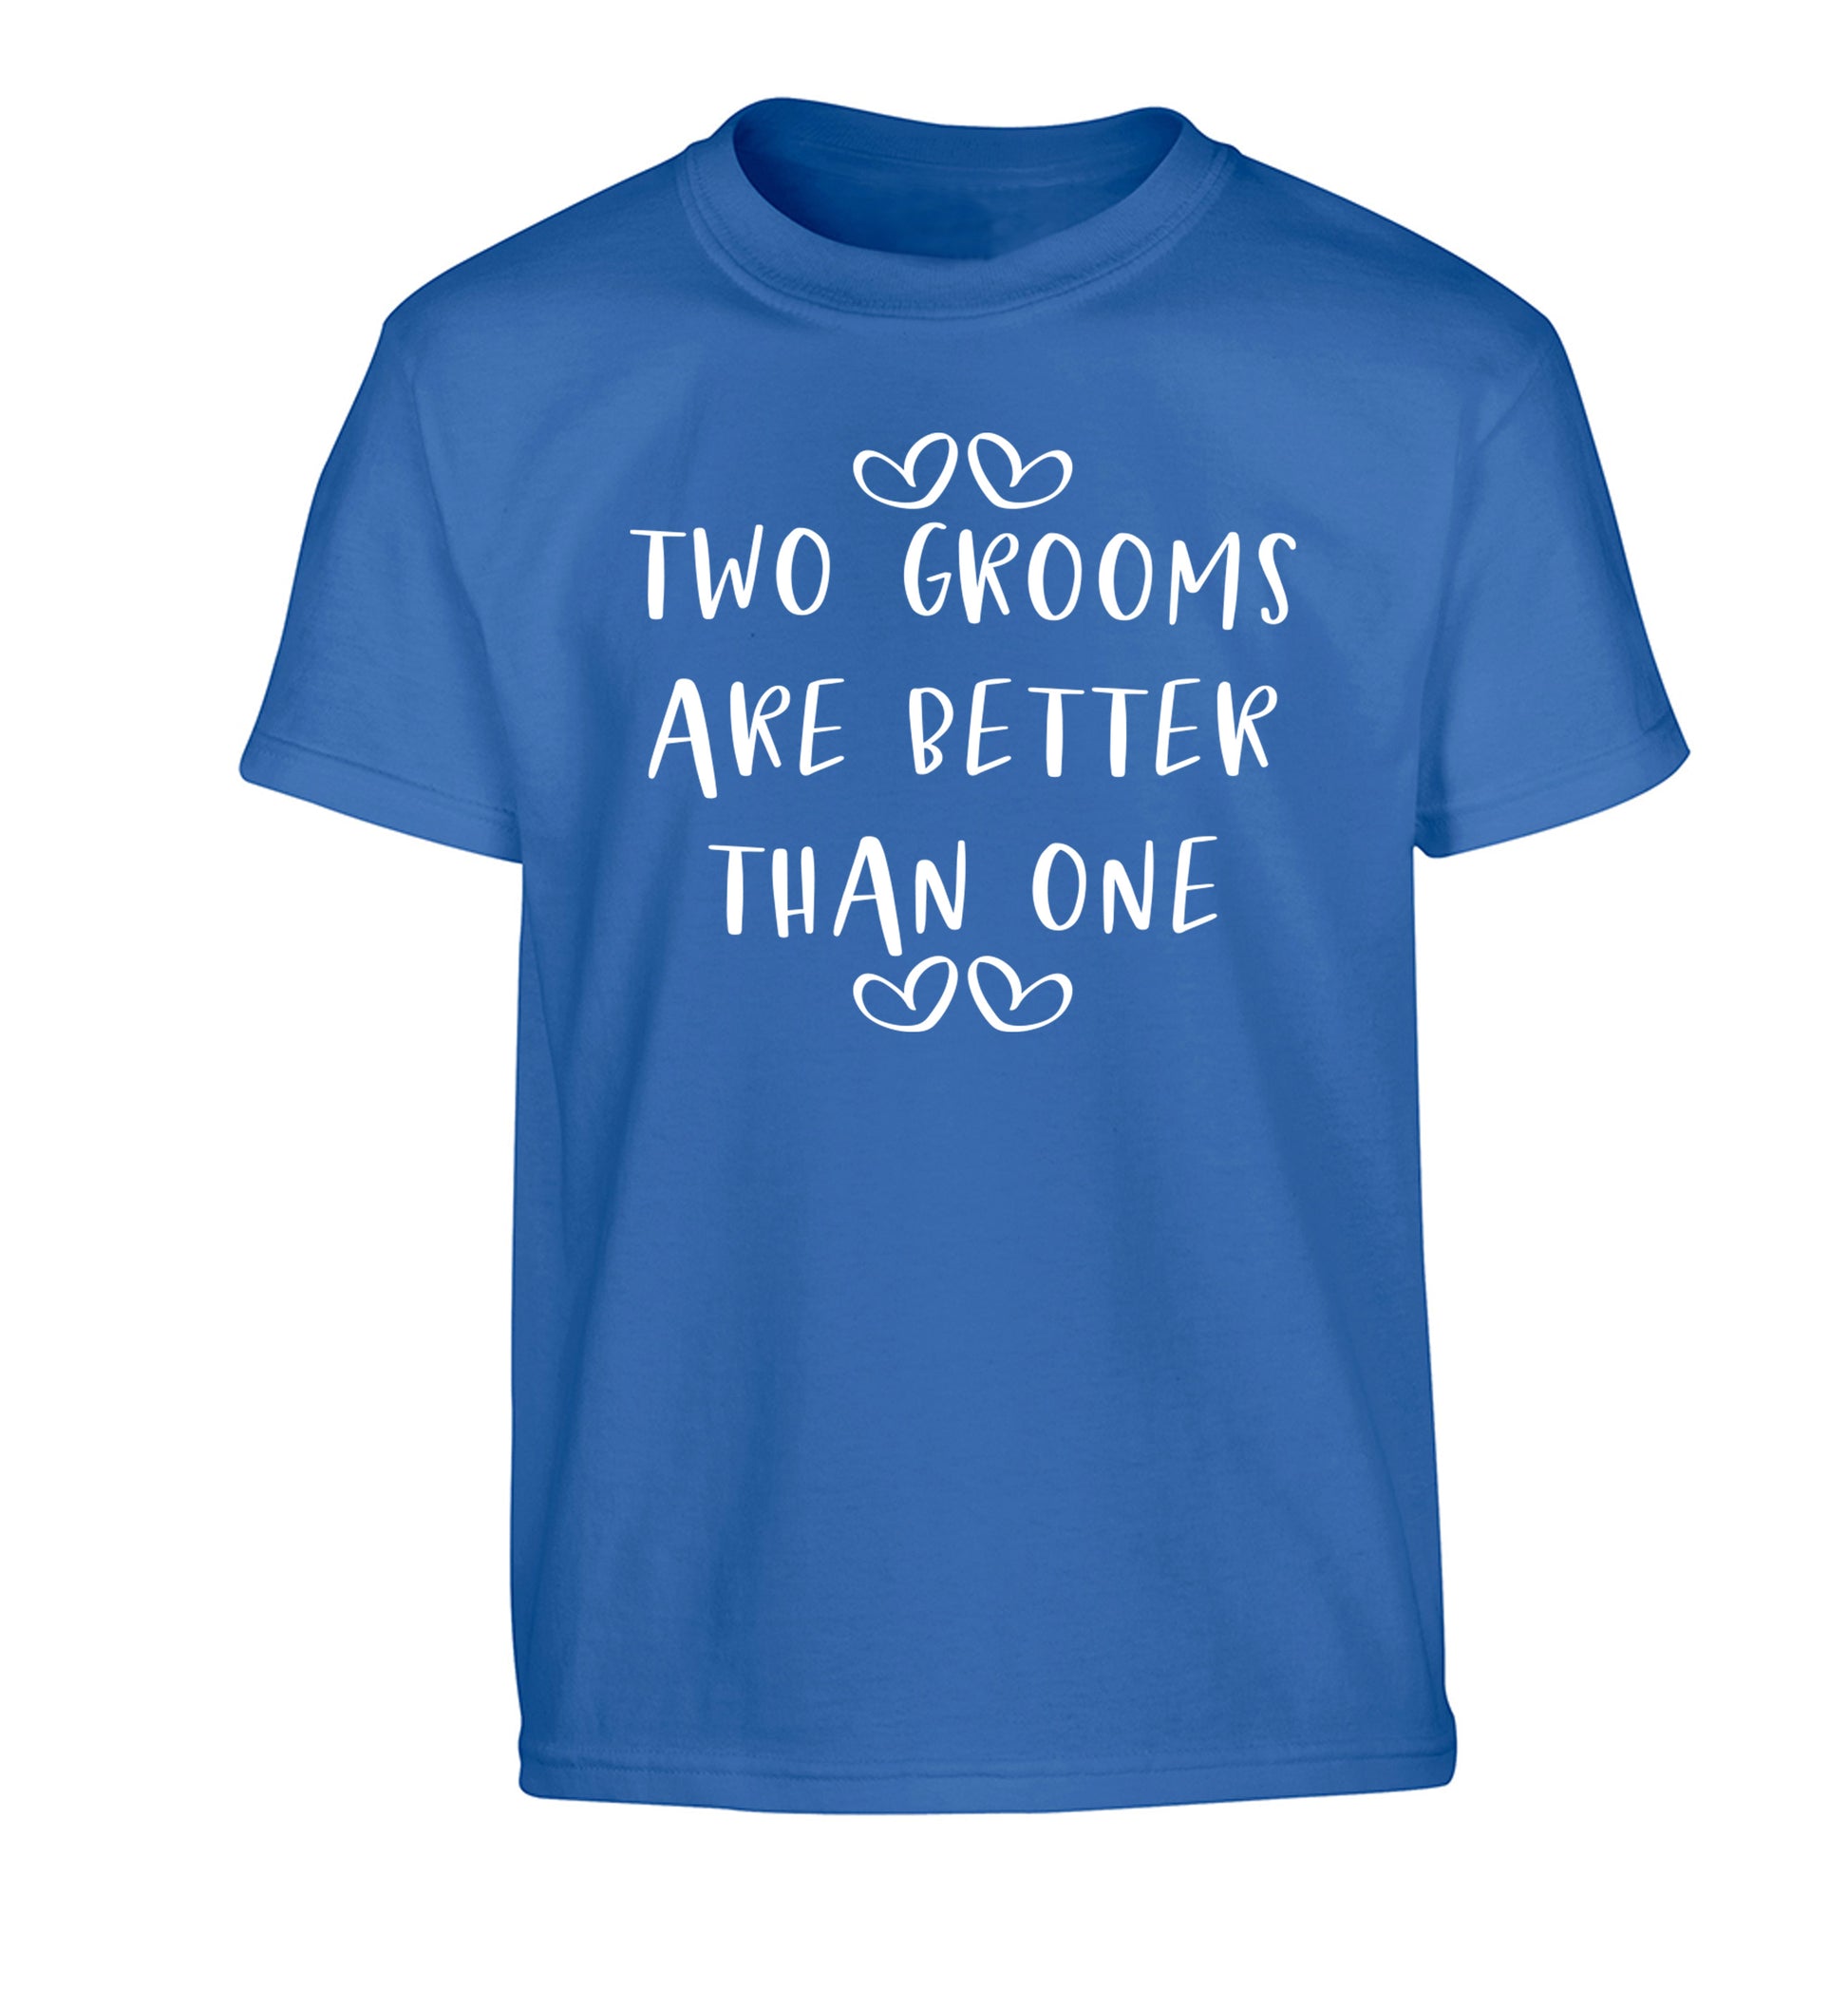 Two grooms are better than one Children's blue Tshirt 12-13 Years